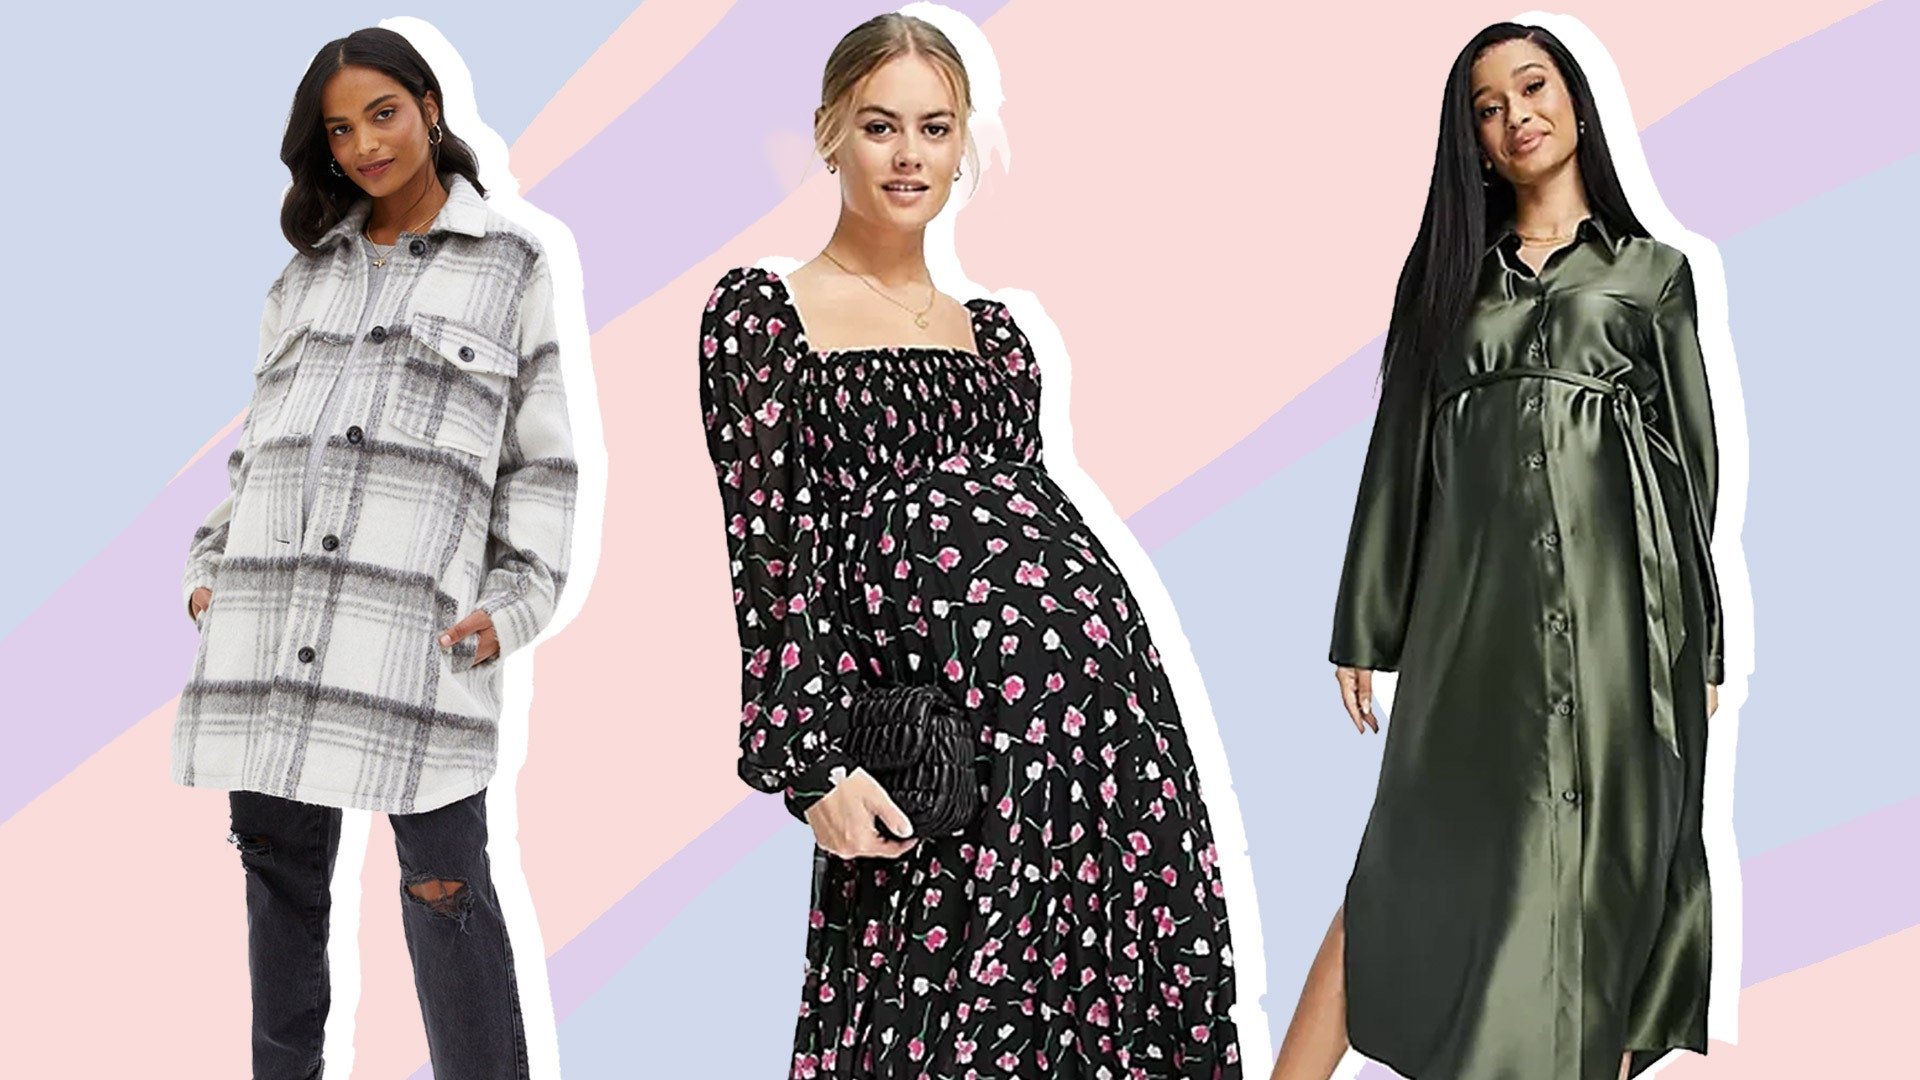 We've found 17 Black Friday maternity deals worth buying, in case you were worried about missing out on the BF fashion sales